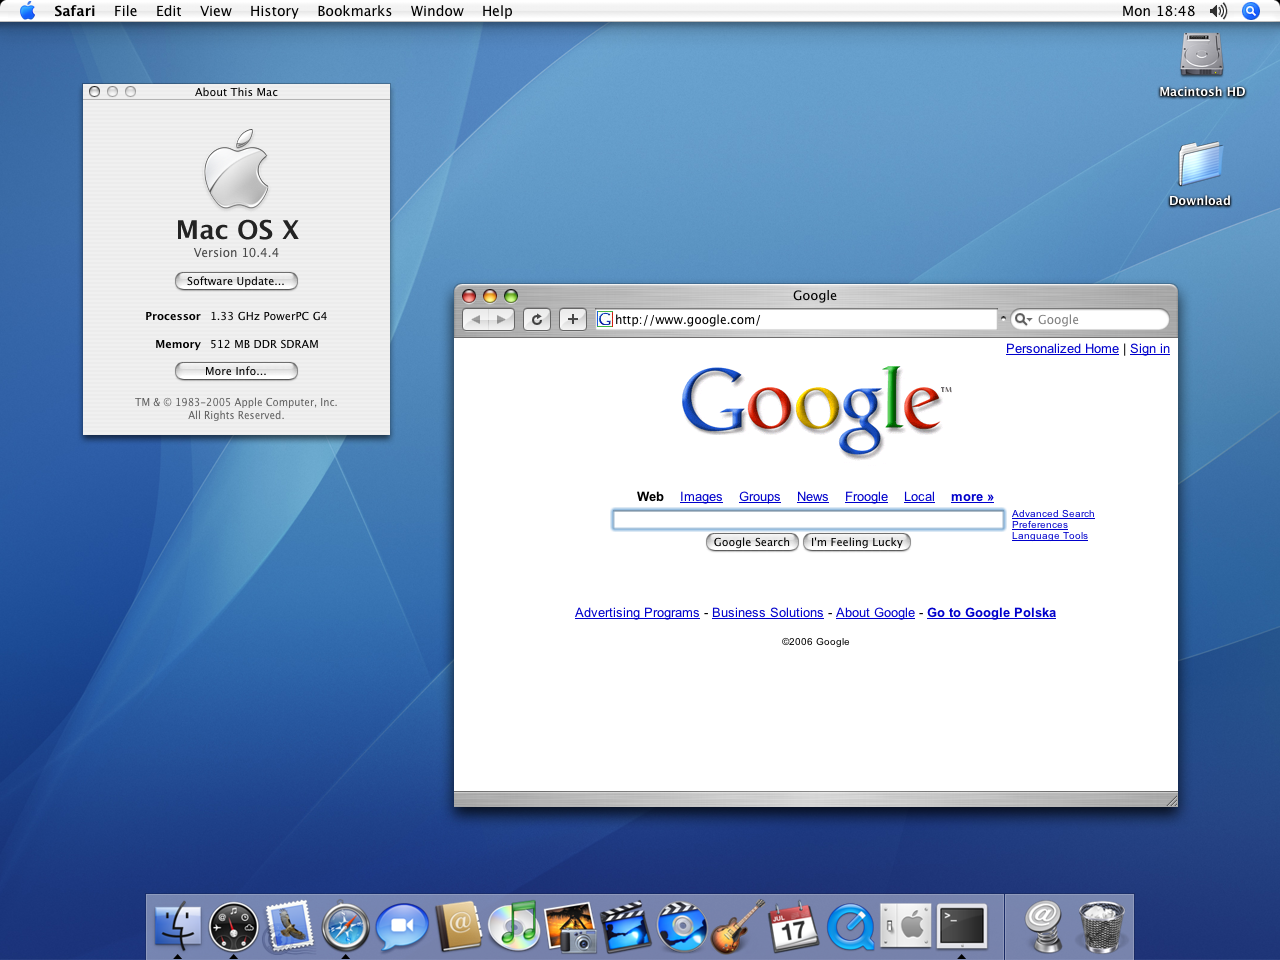 Java 8 For Mac Os X 10.4